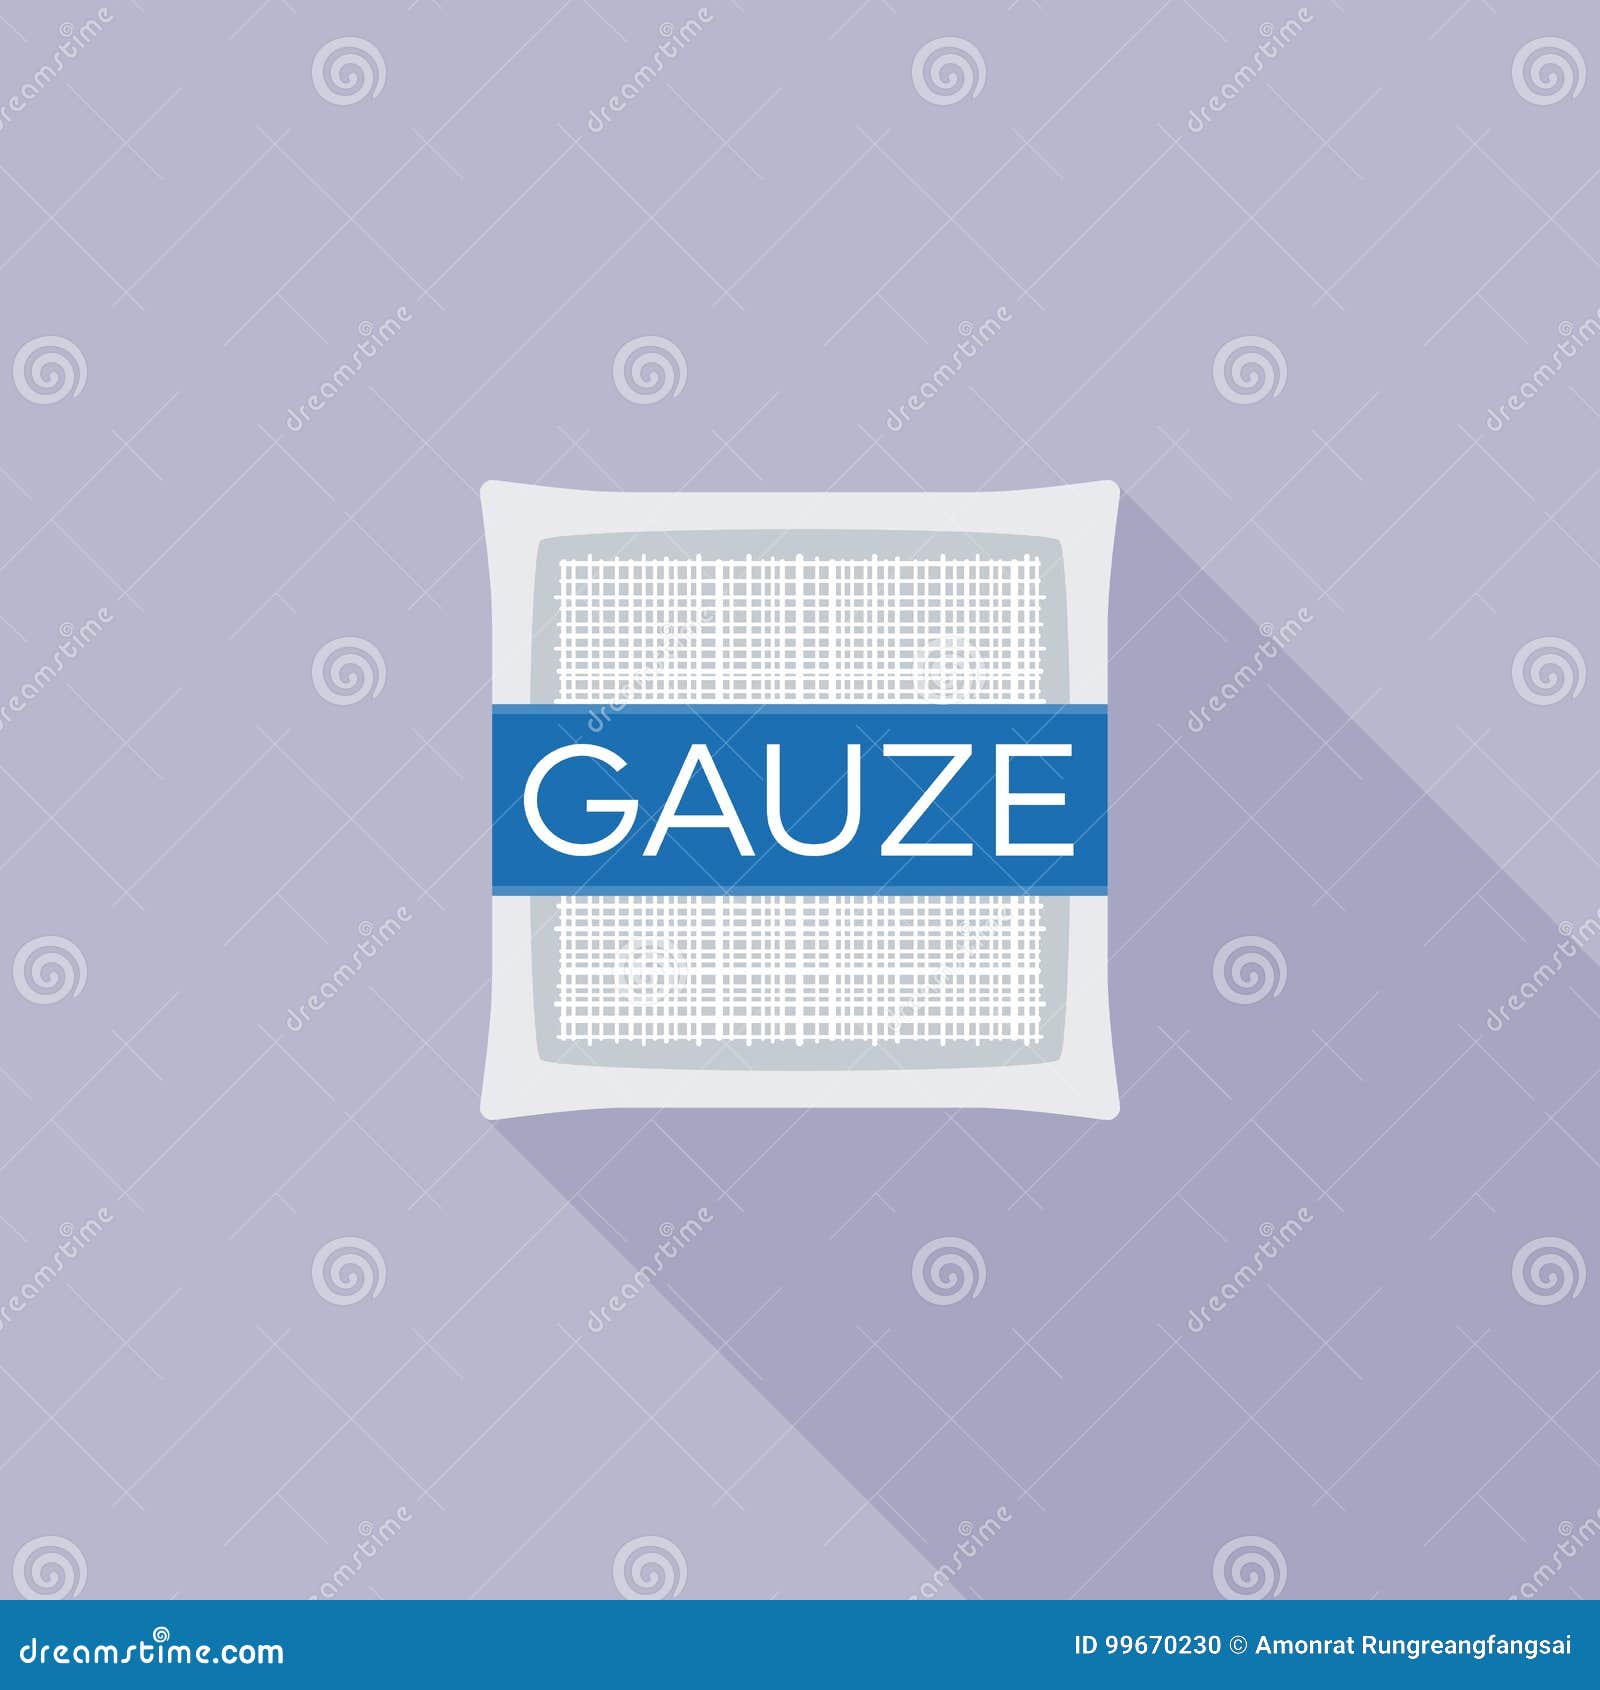 gauze pad for first aid icon